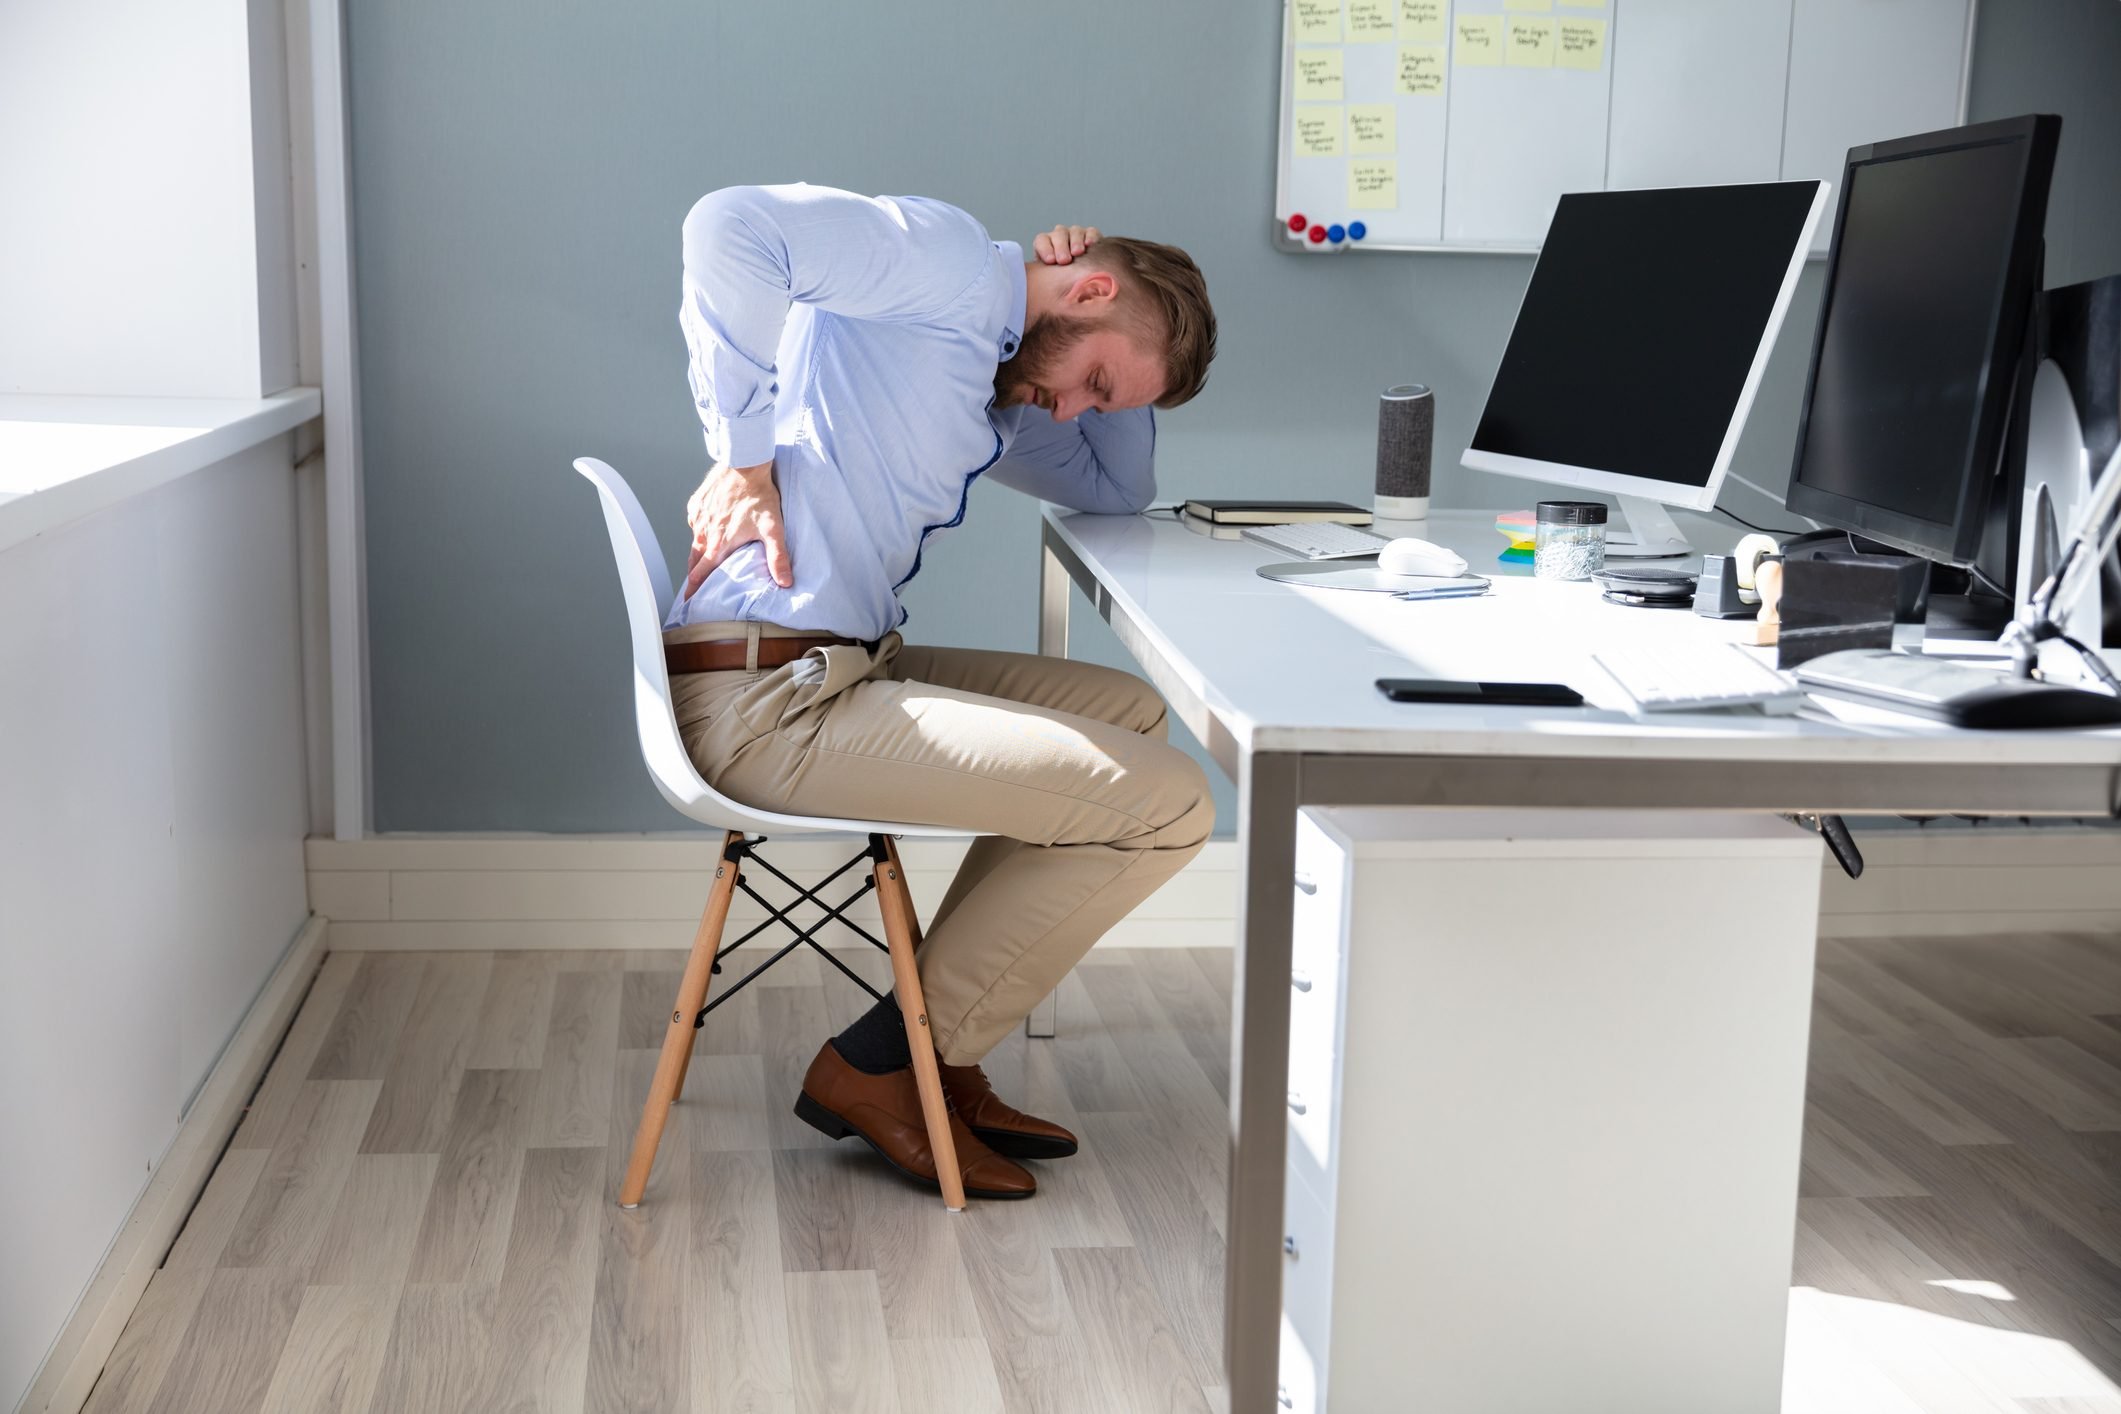 8 Ways to Reduce Arthritis Pain While Sitting at a Desk